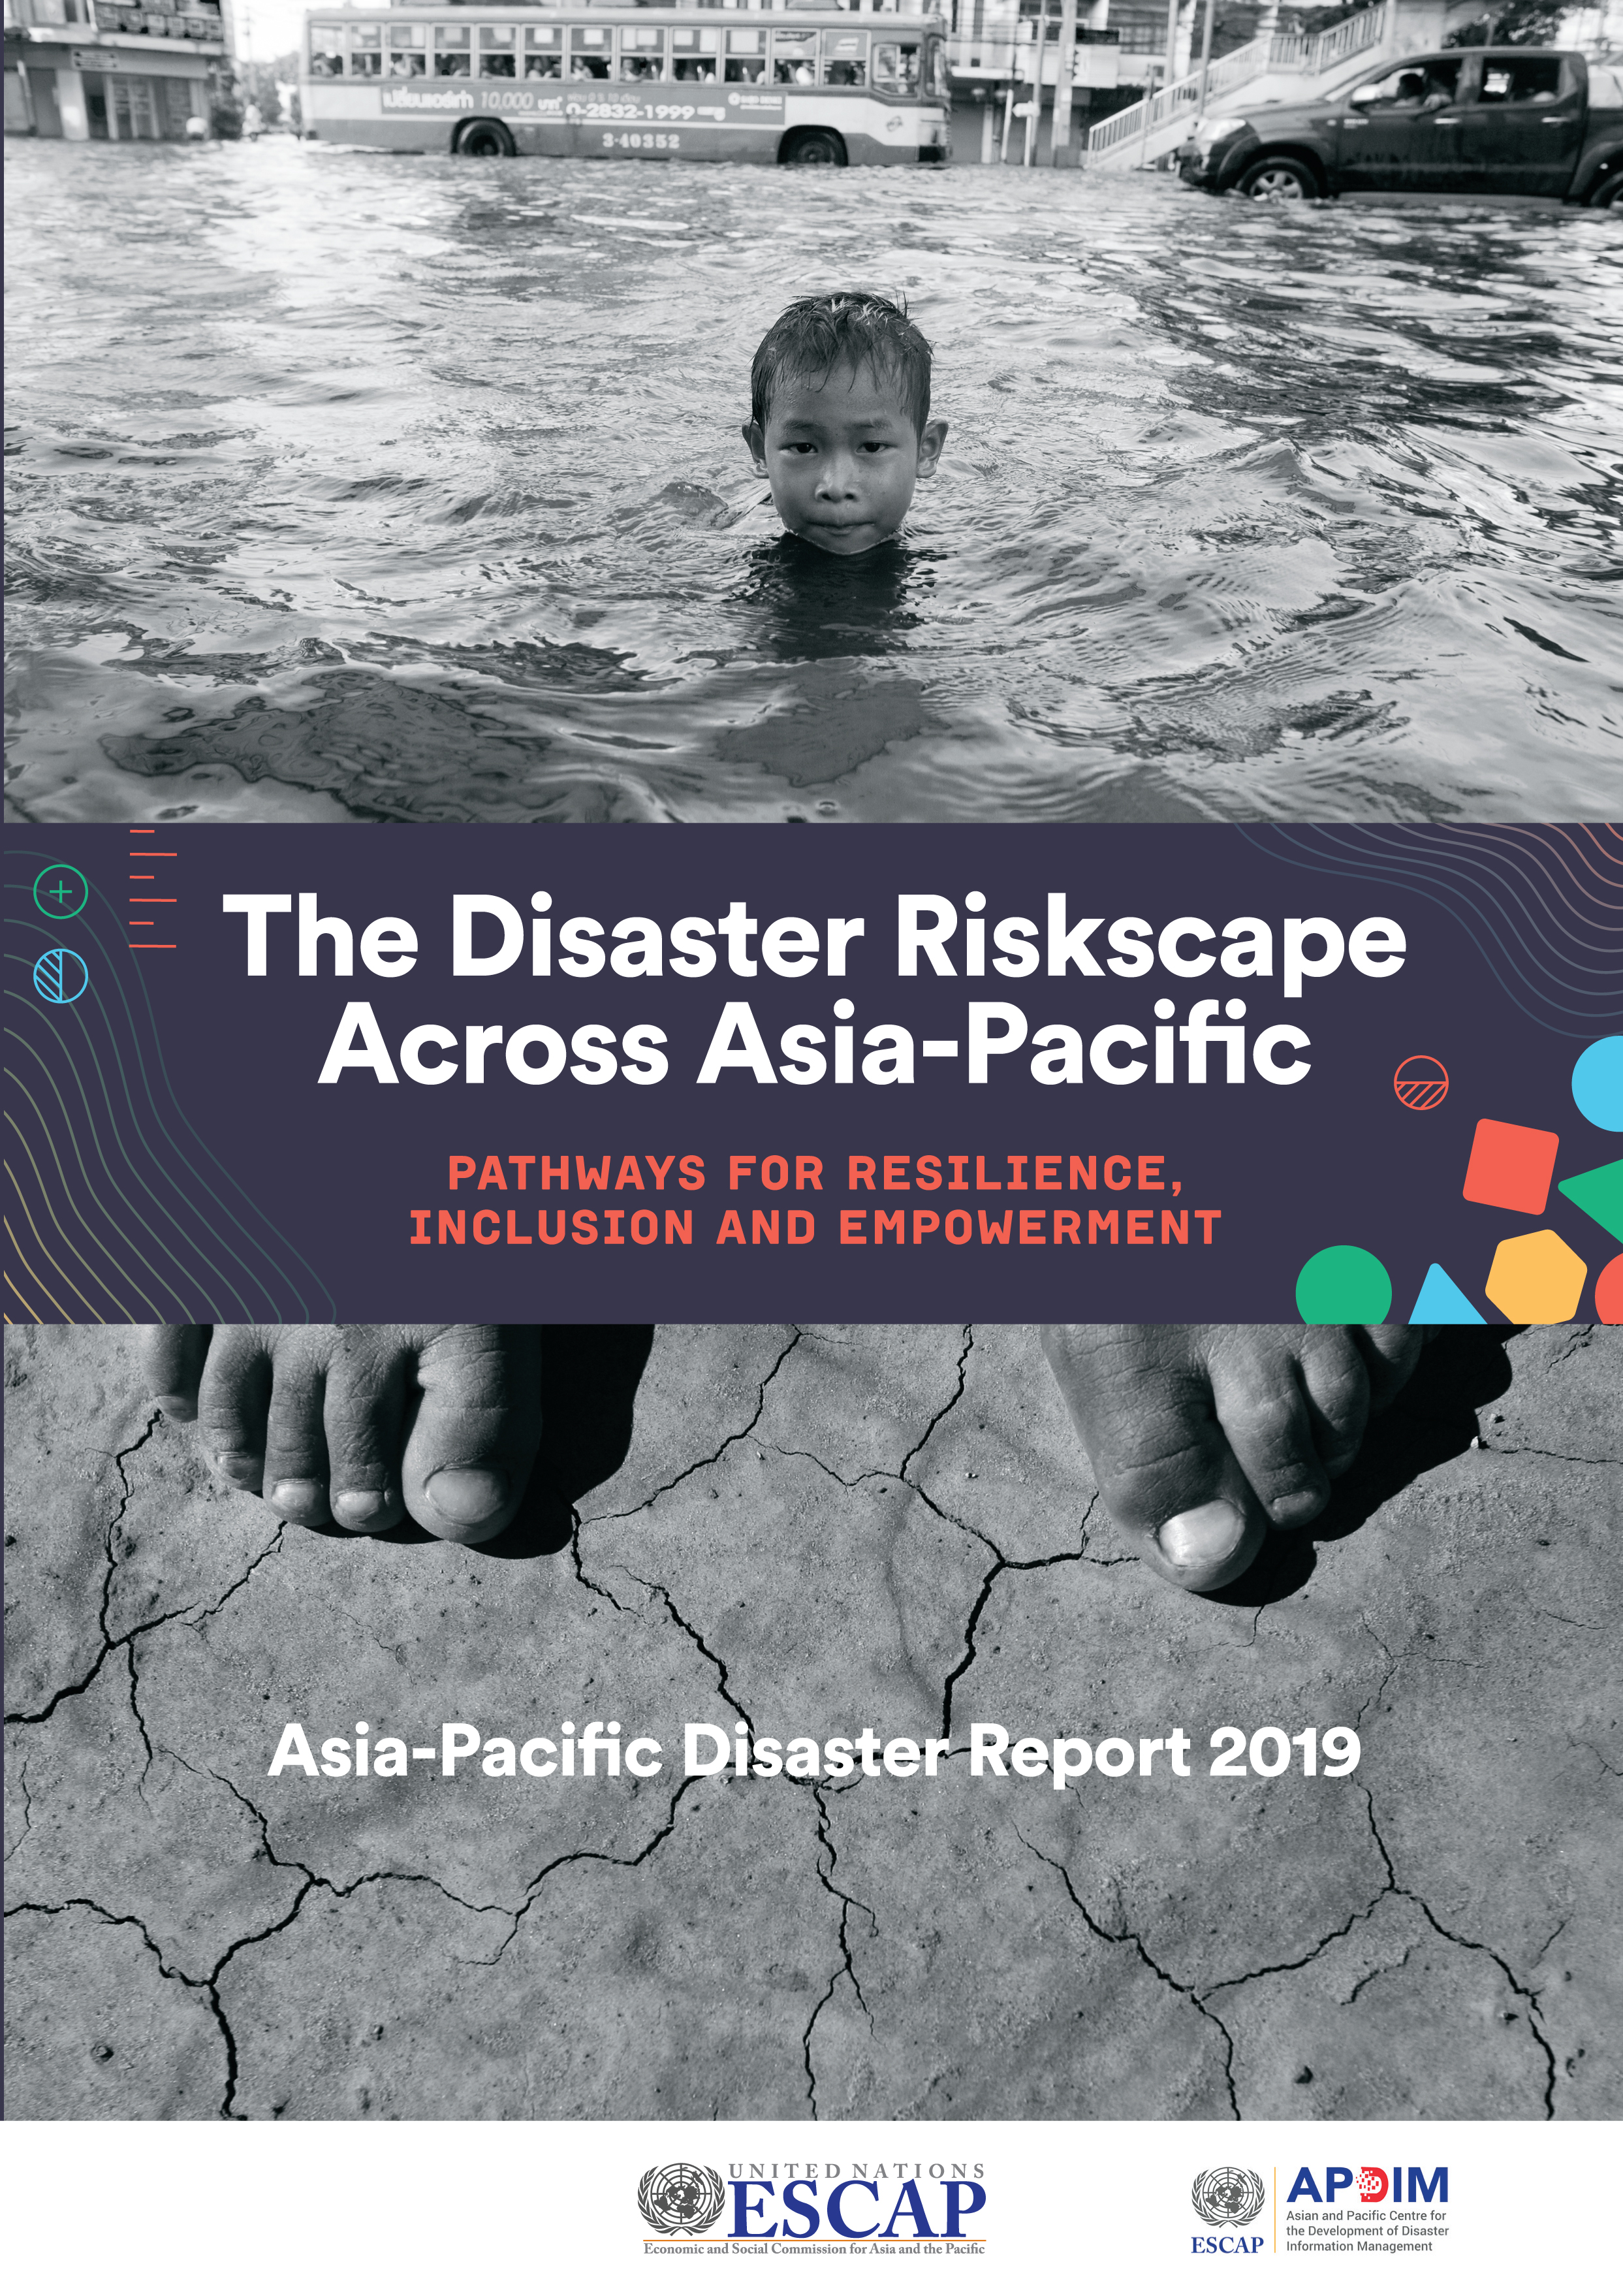 image of Asia-Pacific Disaster Report 2019